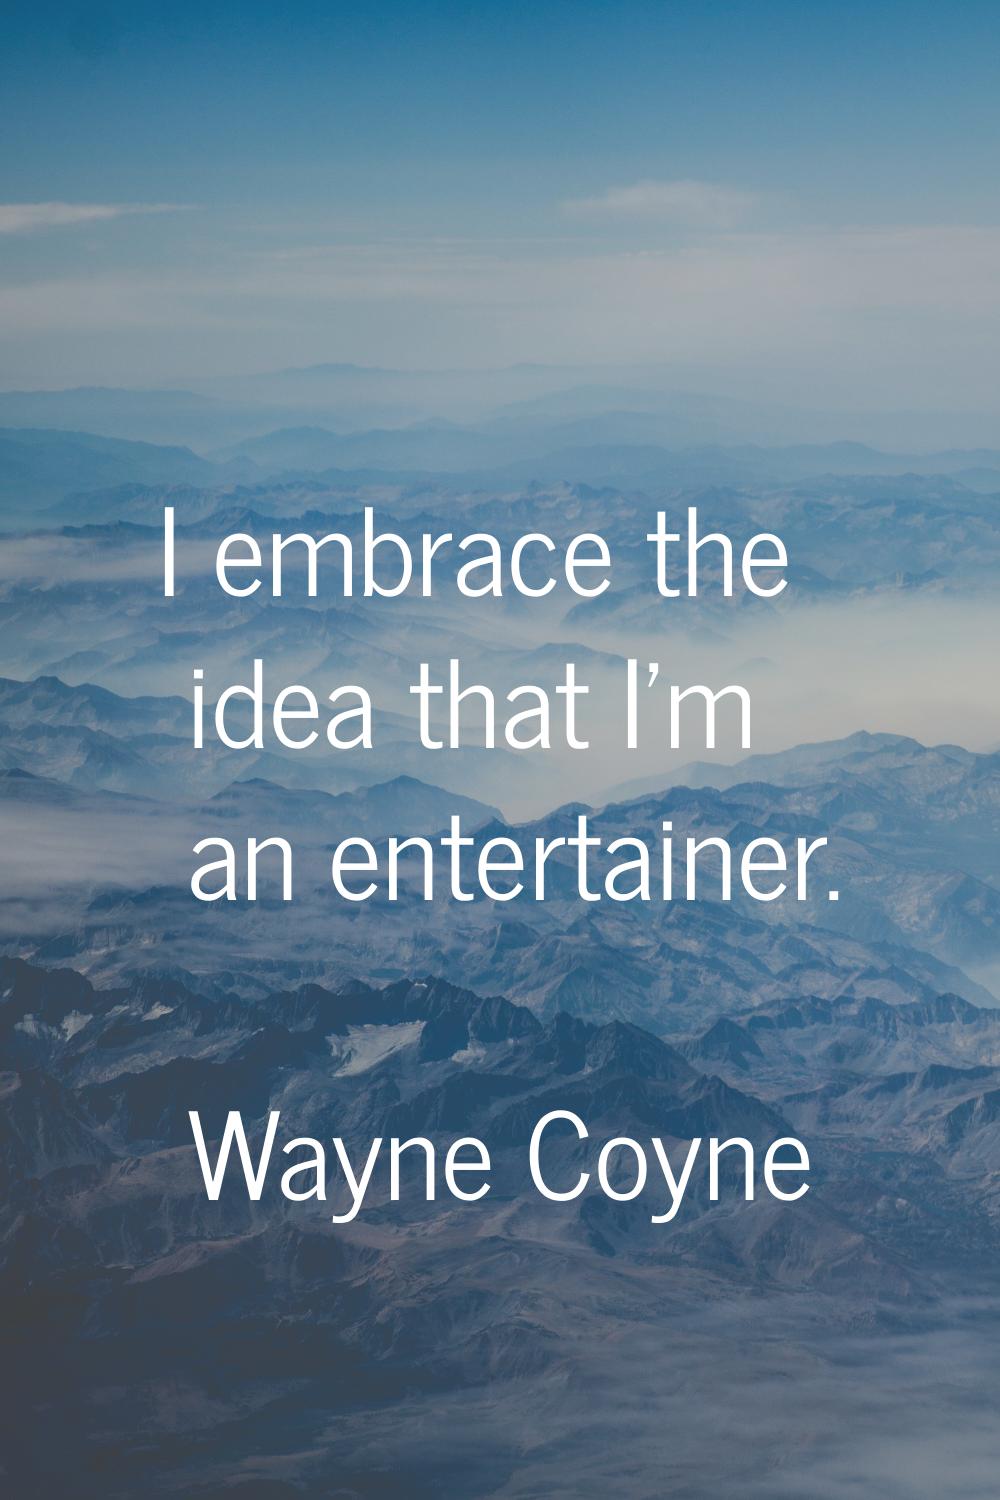 I embrace the idea that I'm an entertainer.